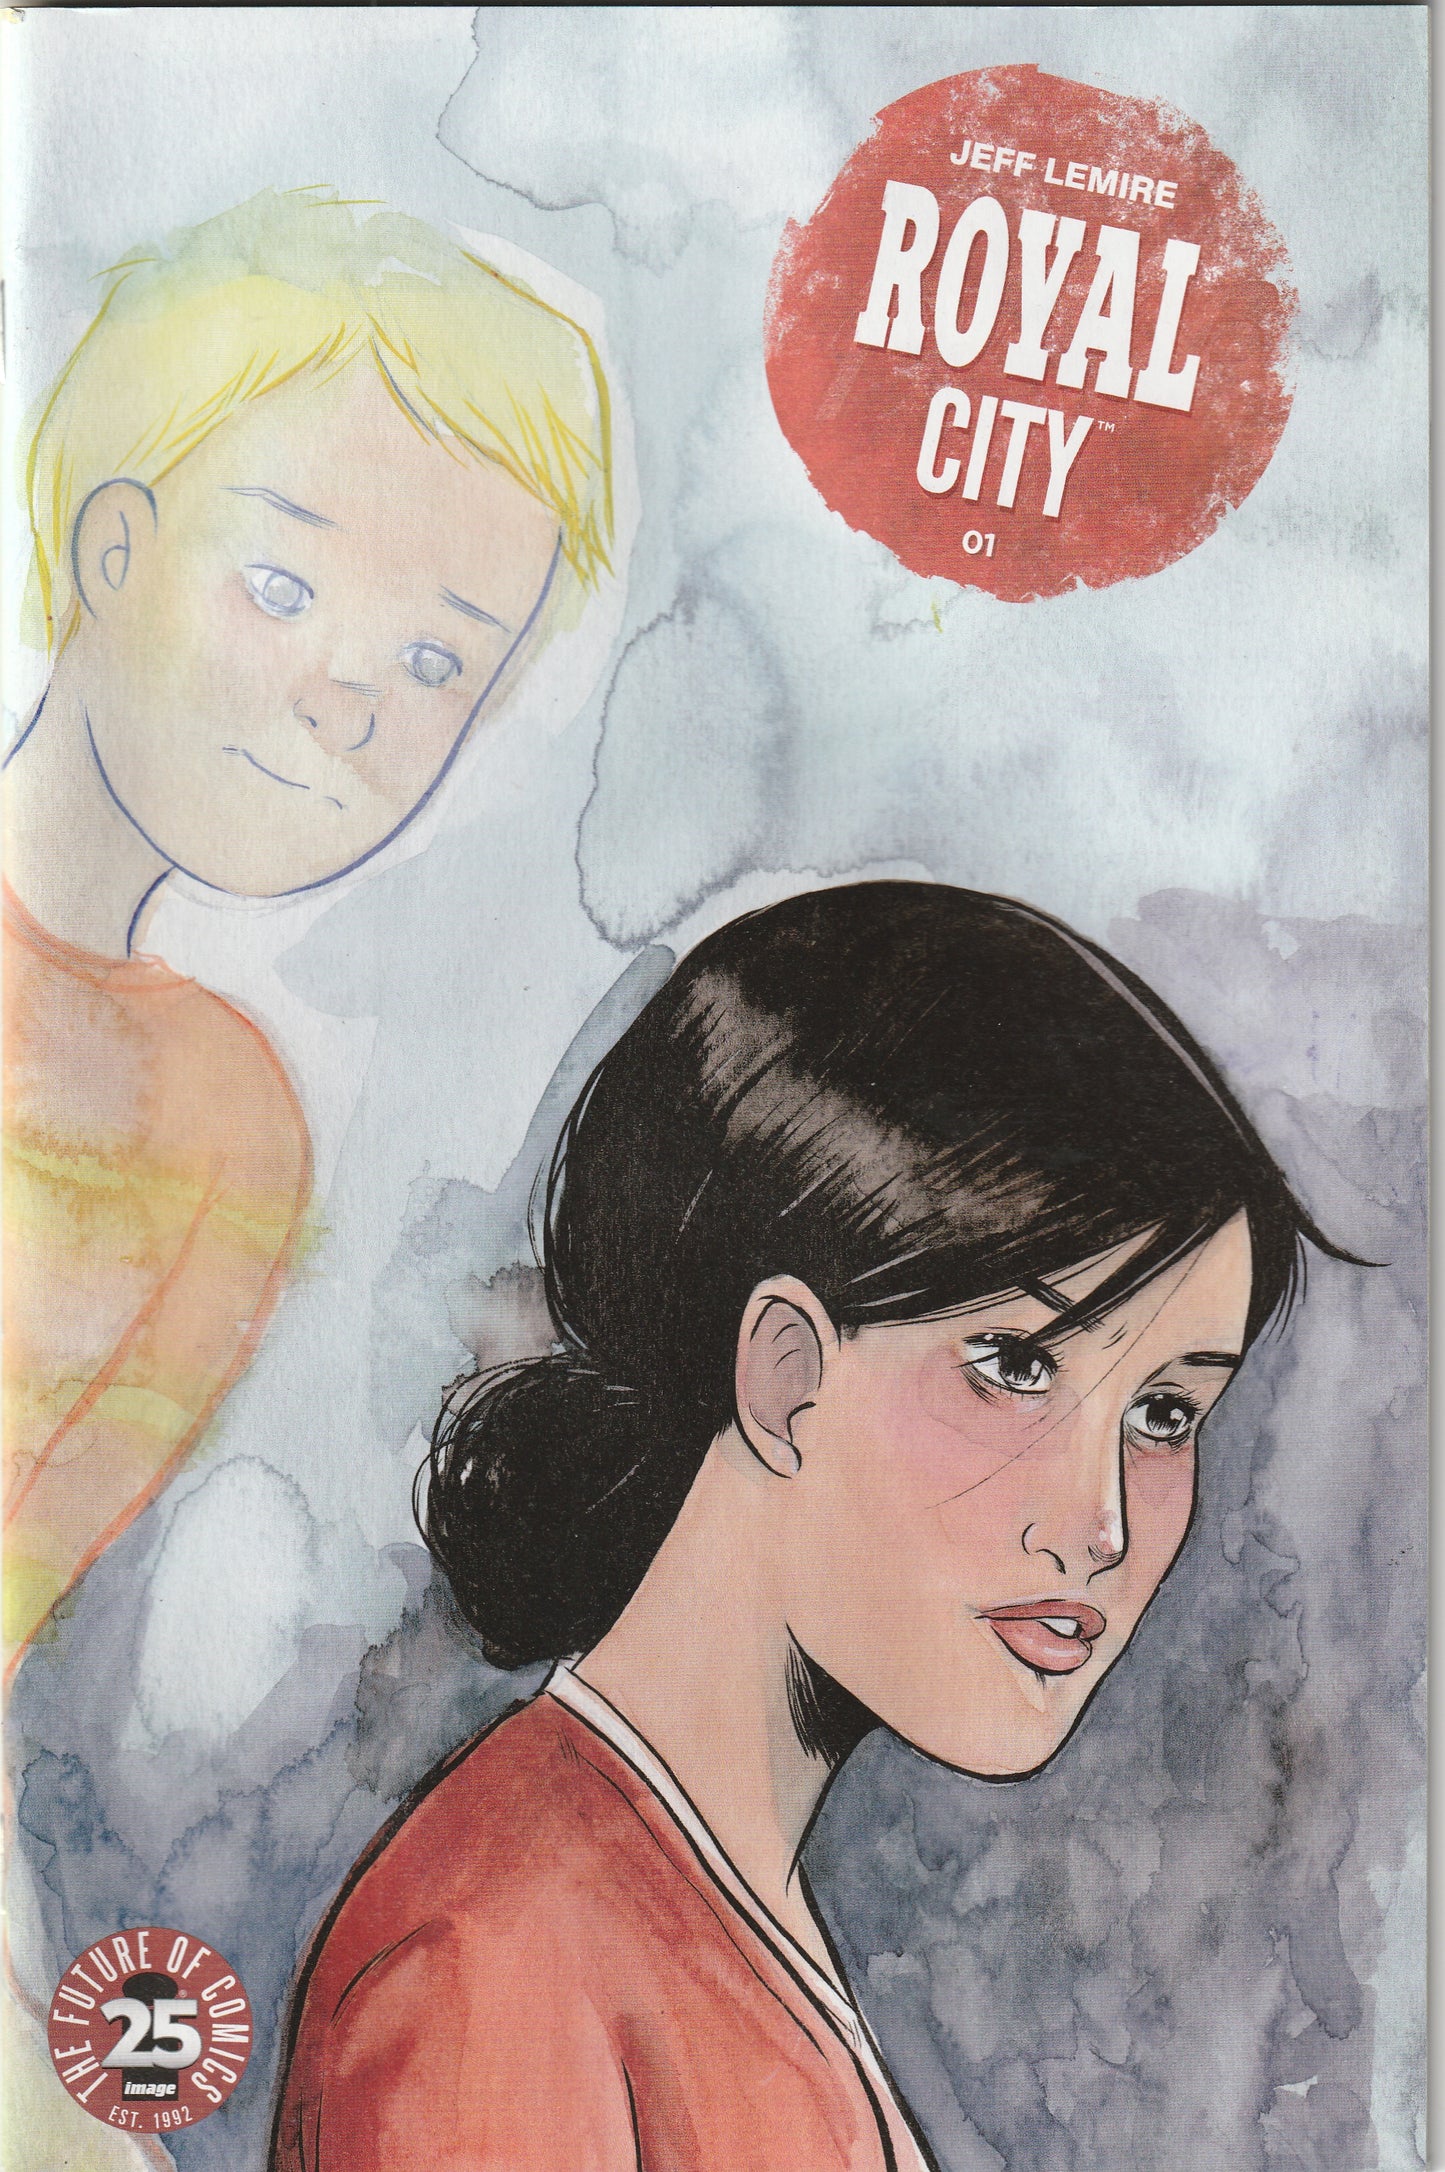 Royal City #1 (2017) - Cover B - Emi Lenox Women's History Month Variant Cover